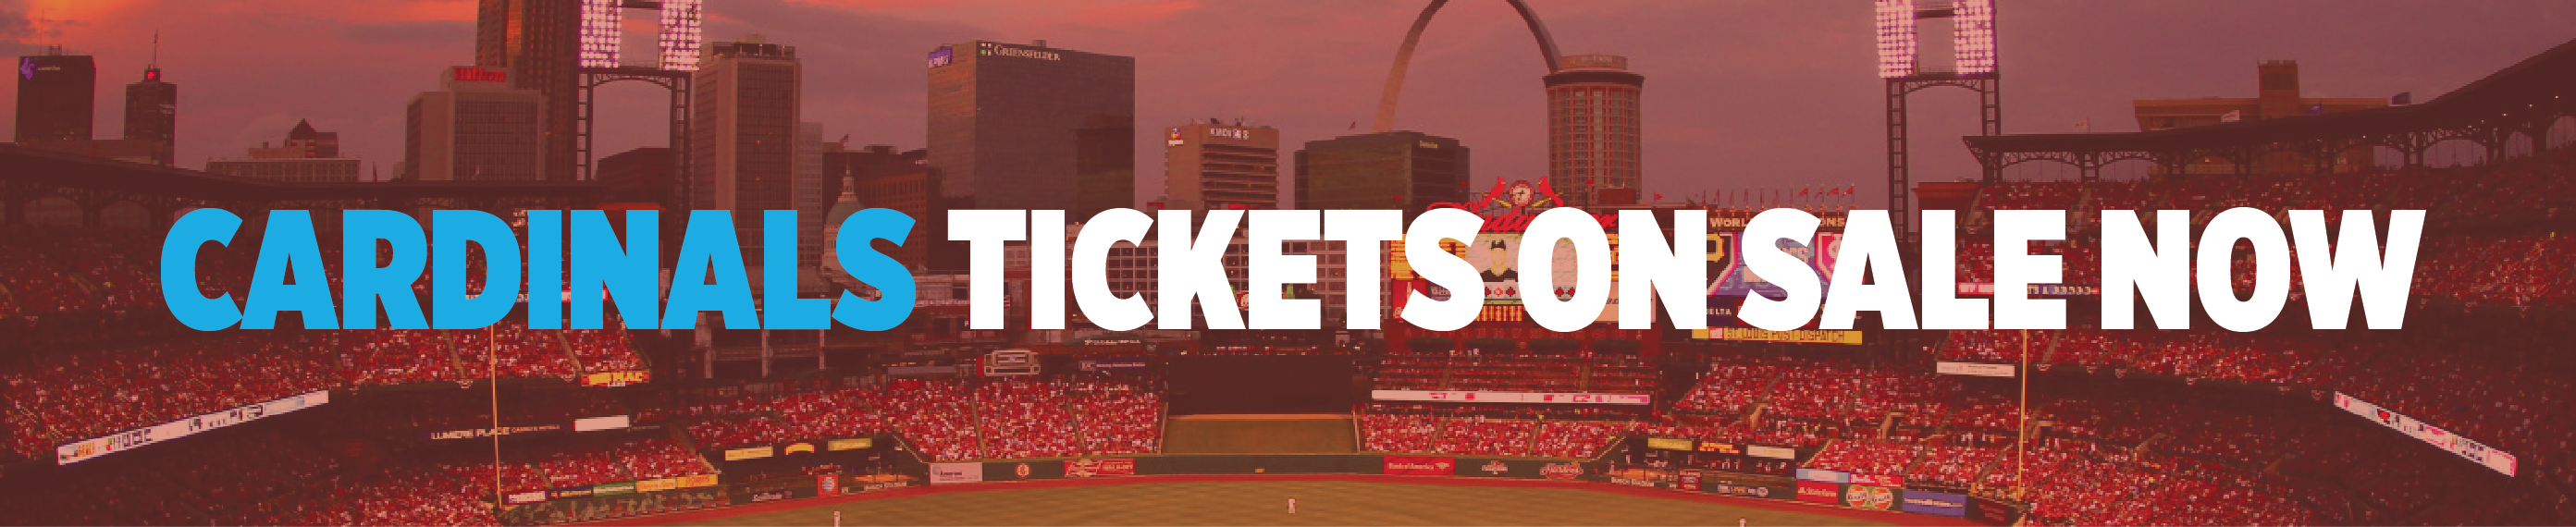 Cards tickets on sale.png